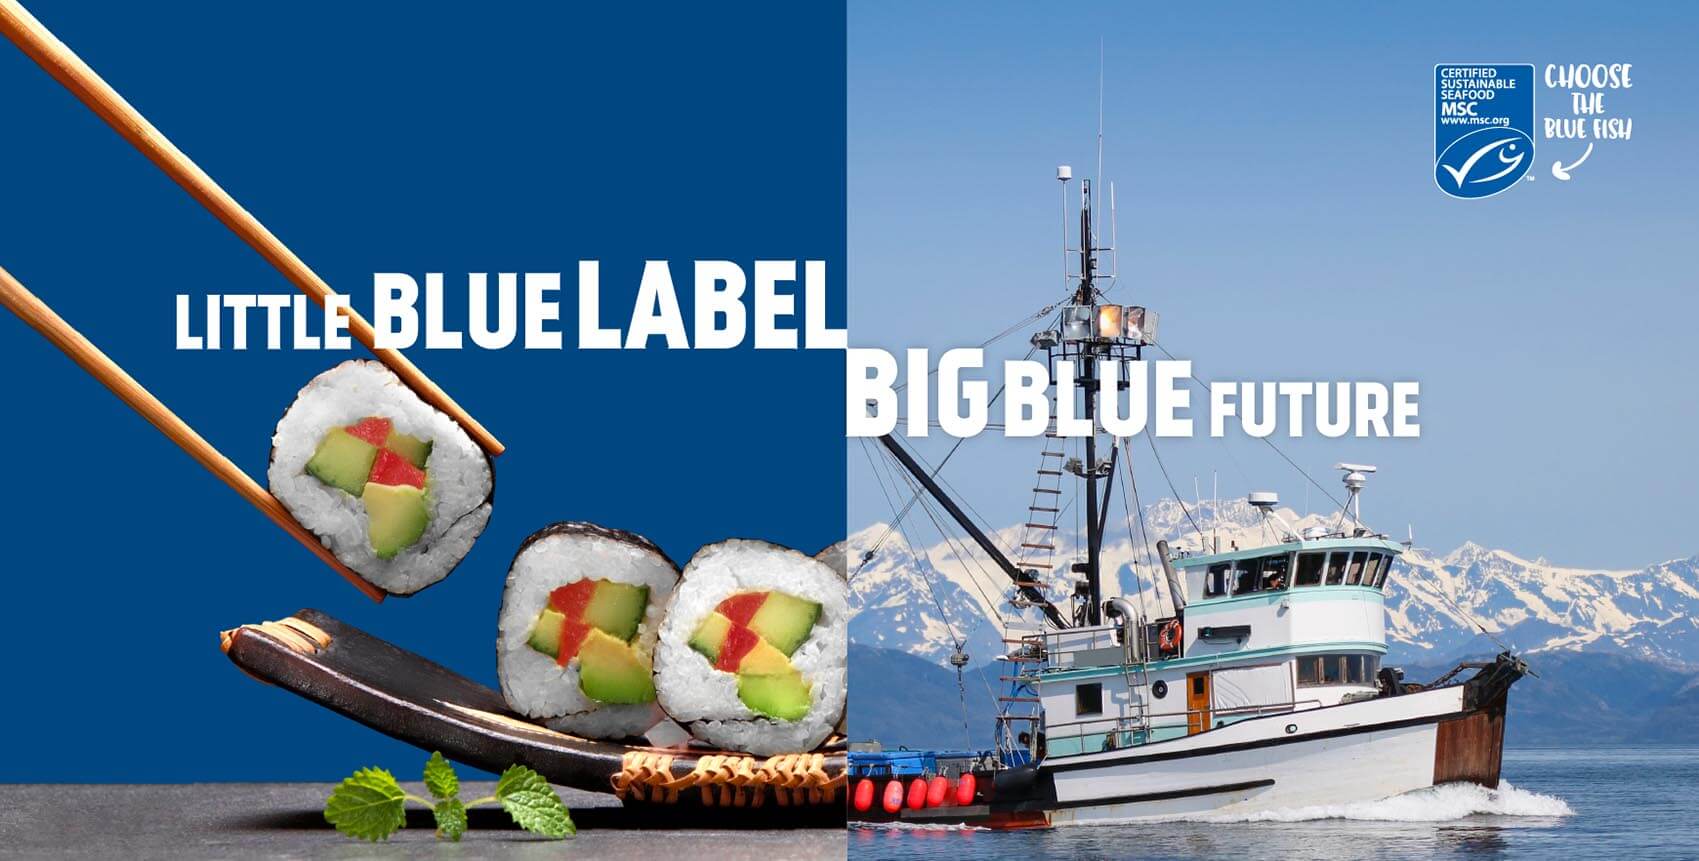 Little Blue Label Big Blue Future - Look for the MSC blue fish tick this World Oceans Day